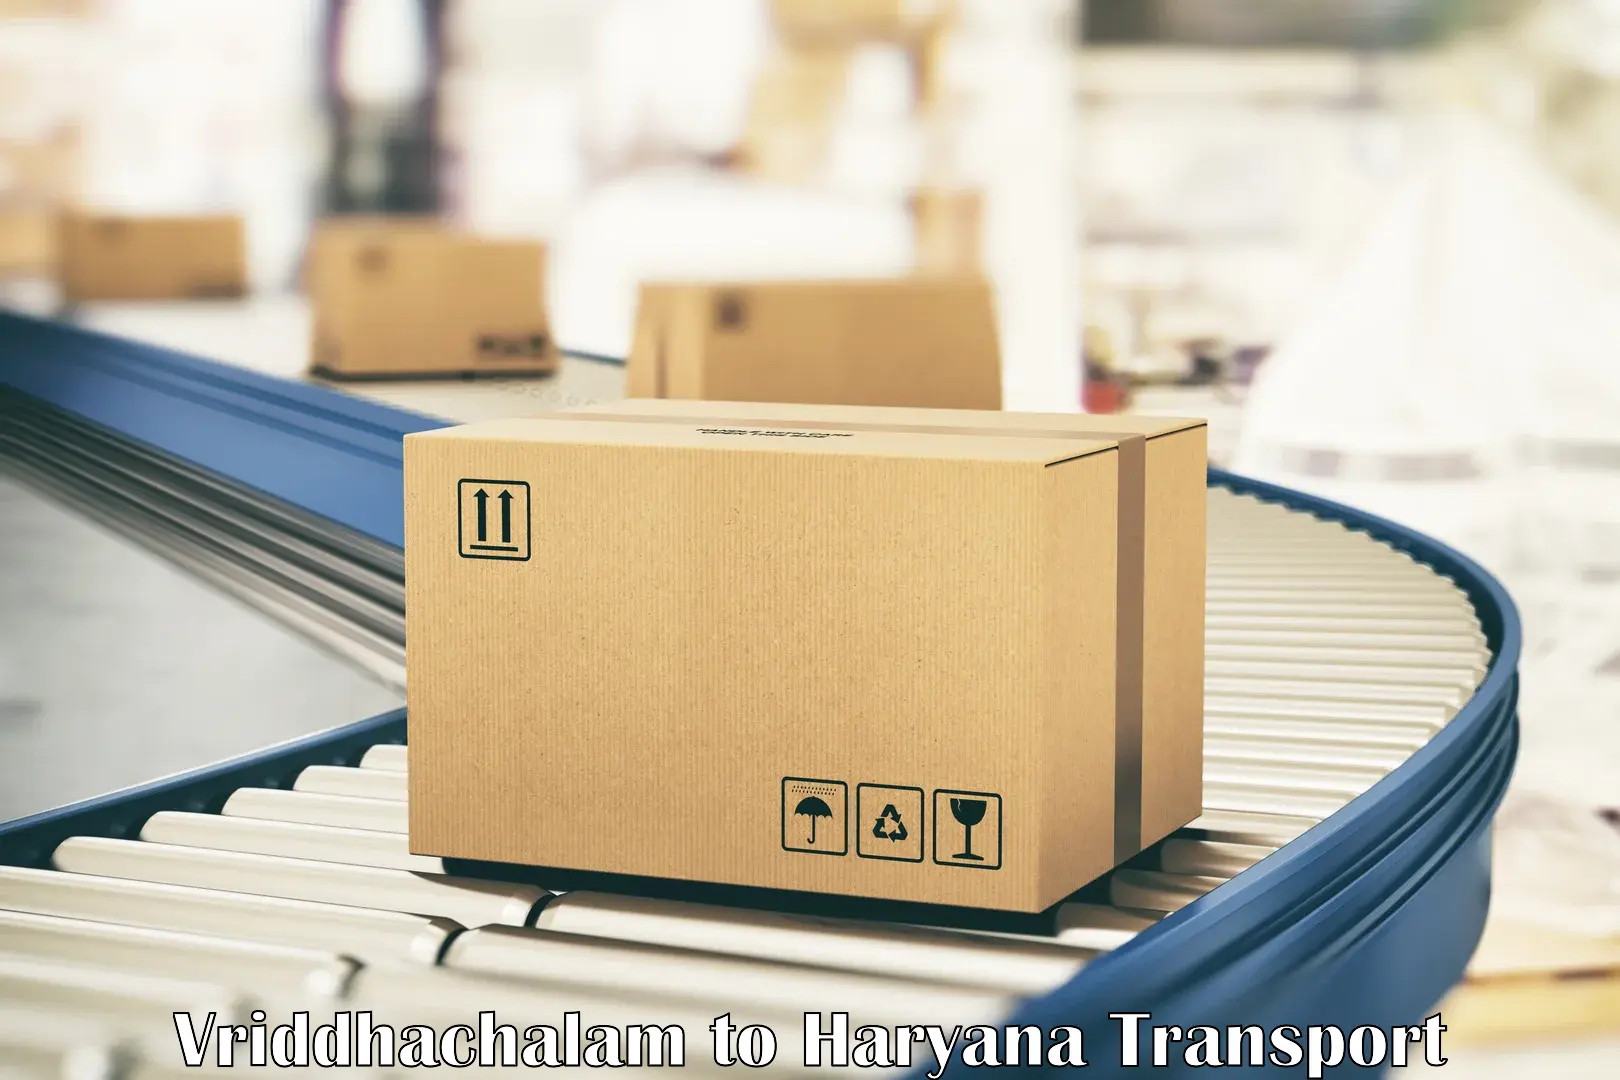 Domestic goods transportation services Vriddhachalam to Panipat